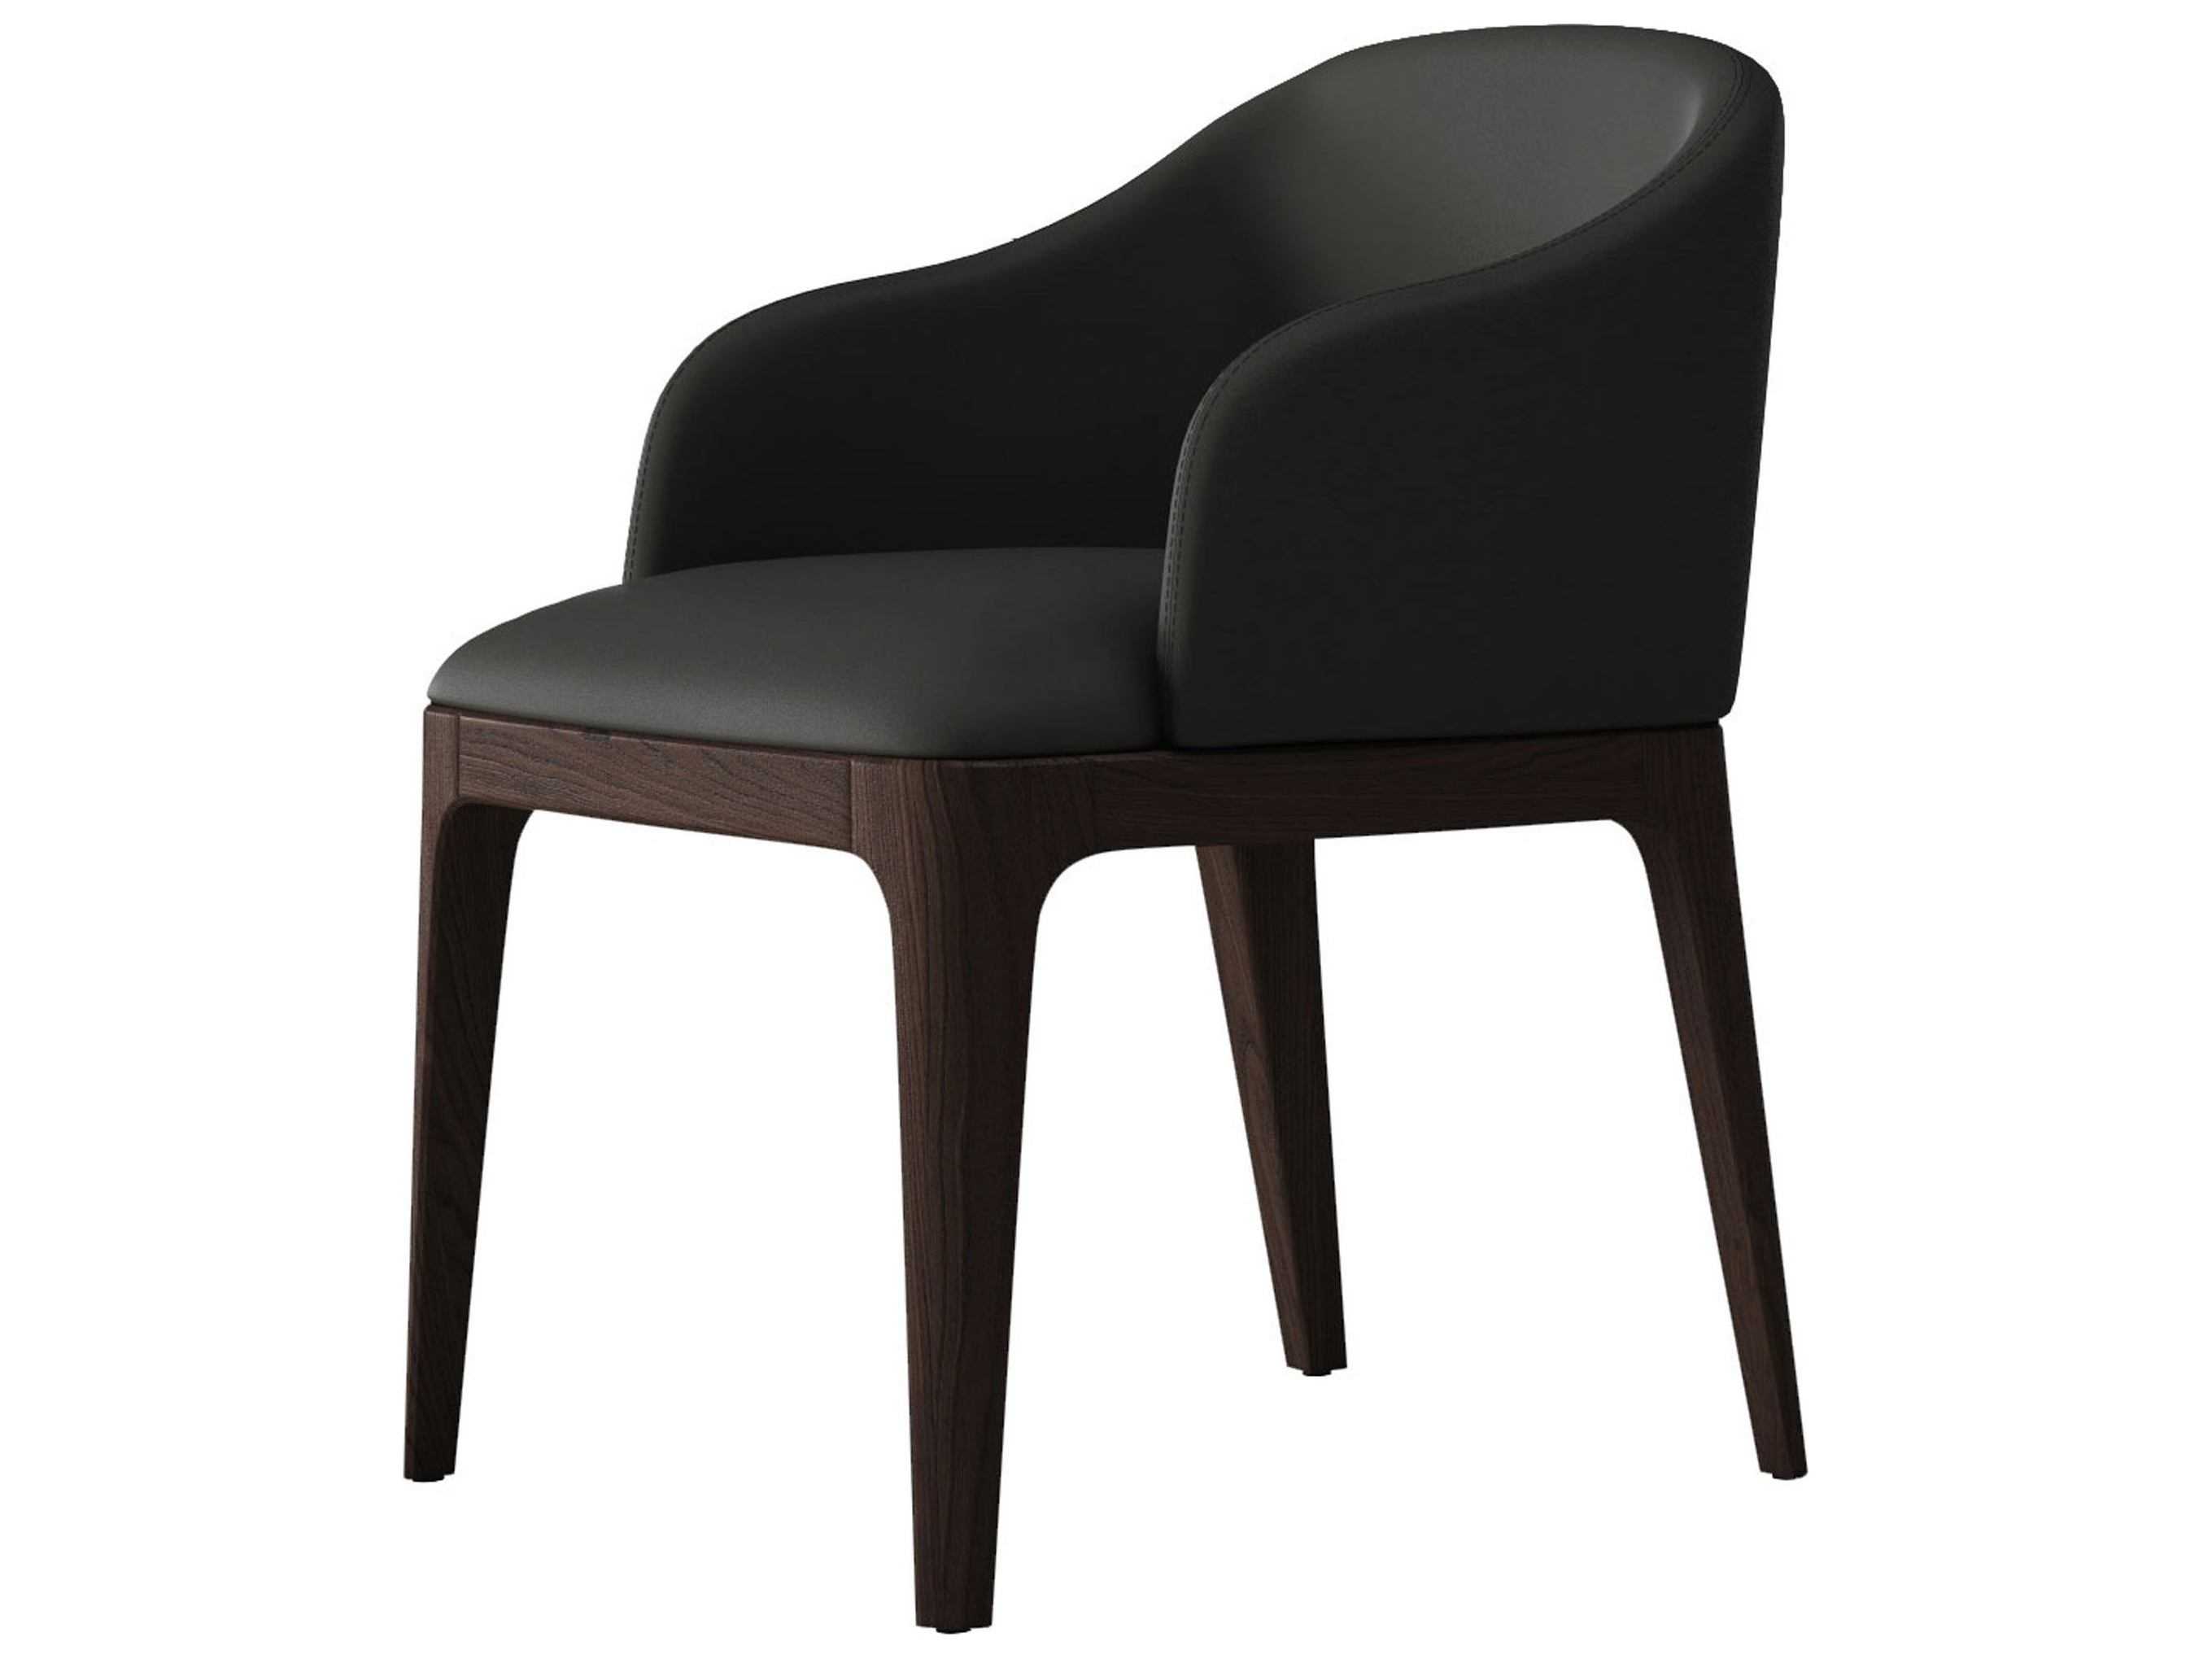 Modloft Wooster Graphite Eco Leather, Black Leather Arm Dining Chair